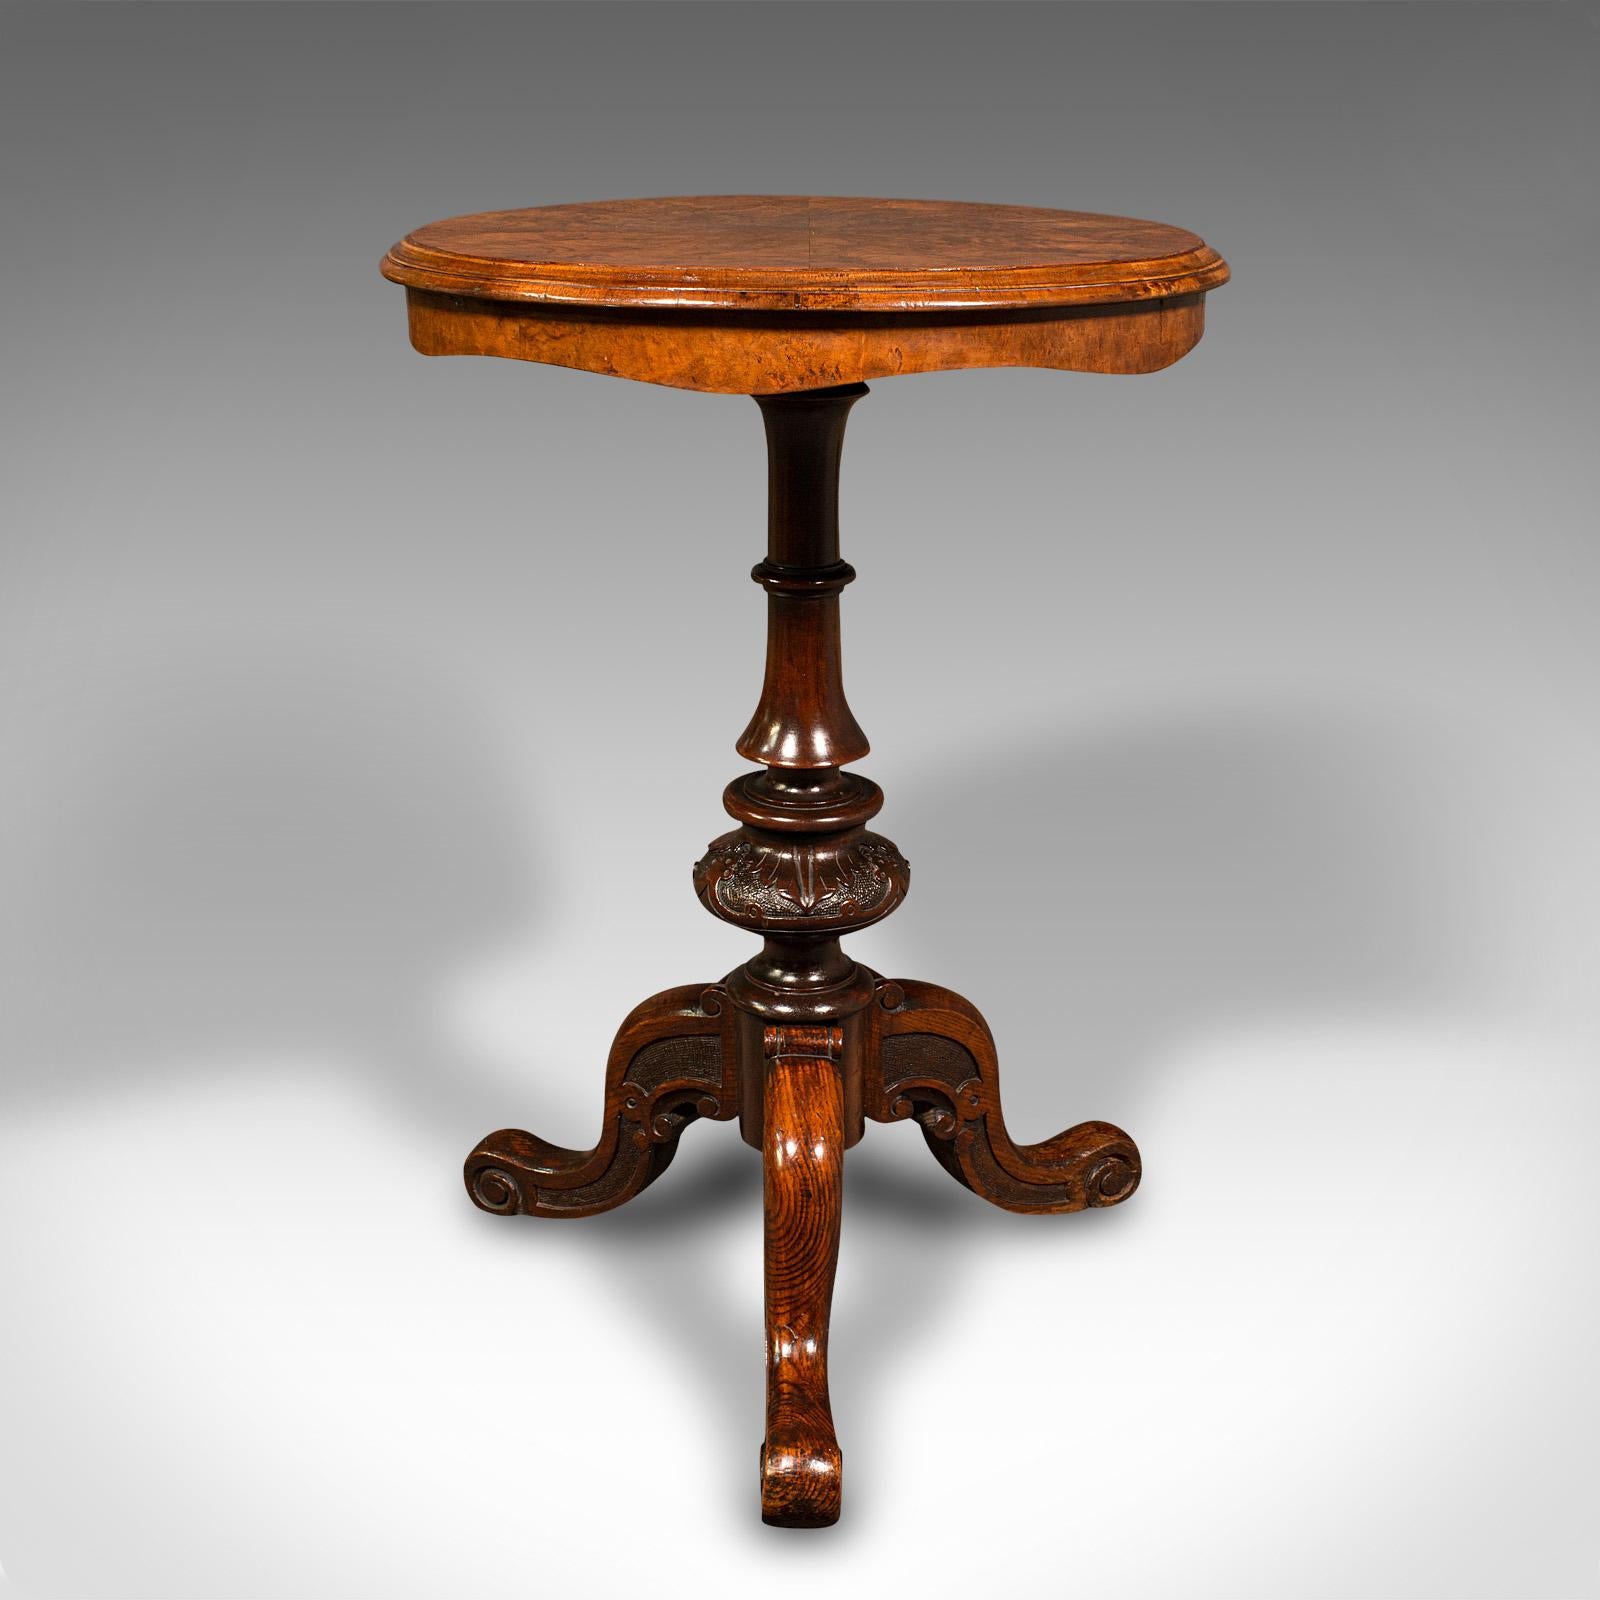 19th Century Antique Lamp Table, English Burr Walnut, Decorative, Occasional, Early Victorian For Sale